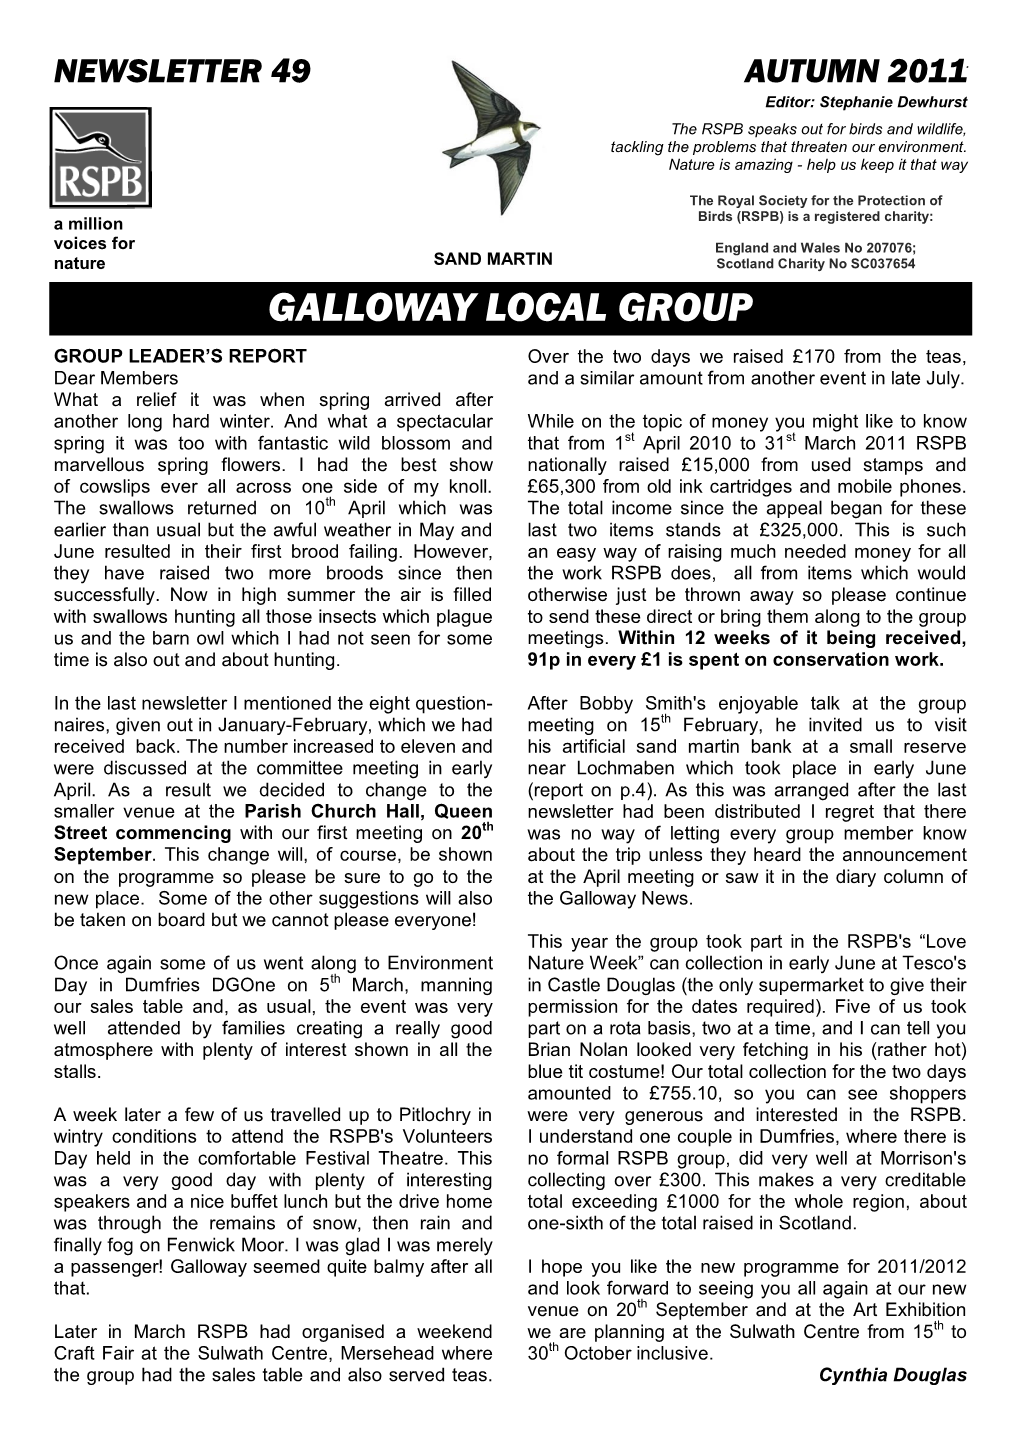 Galloway Local Group